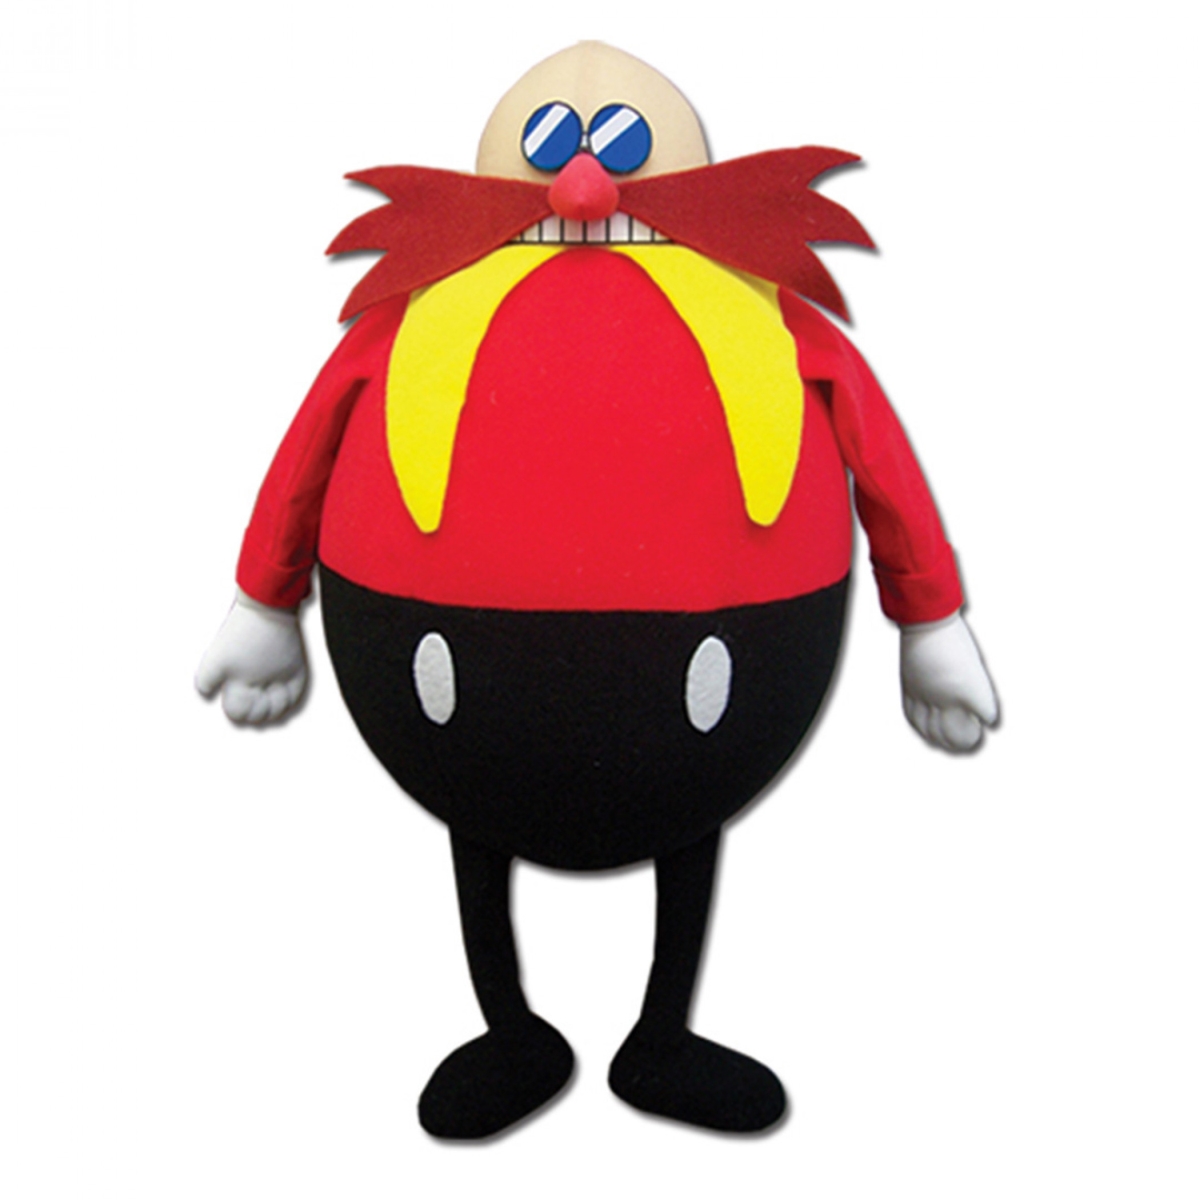 Picture of Sonic 852811 14 in. The Hedgehog Dr. Robotnik Plush Toy Doll